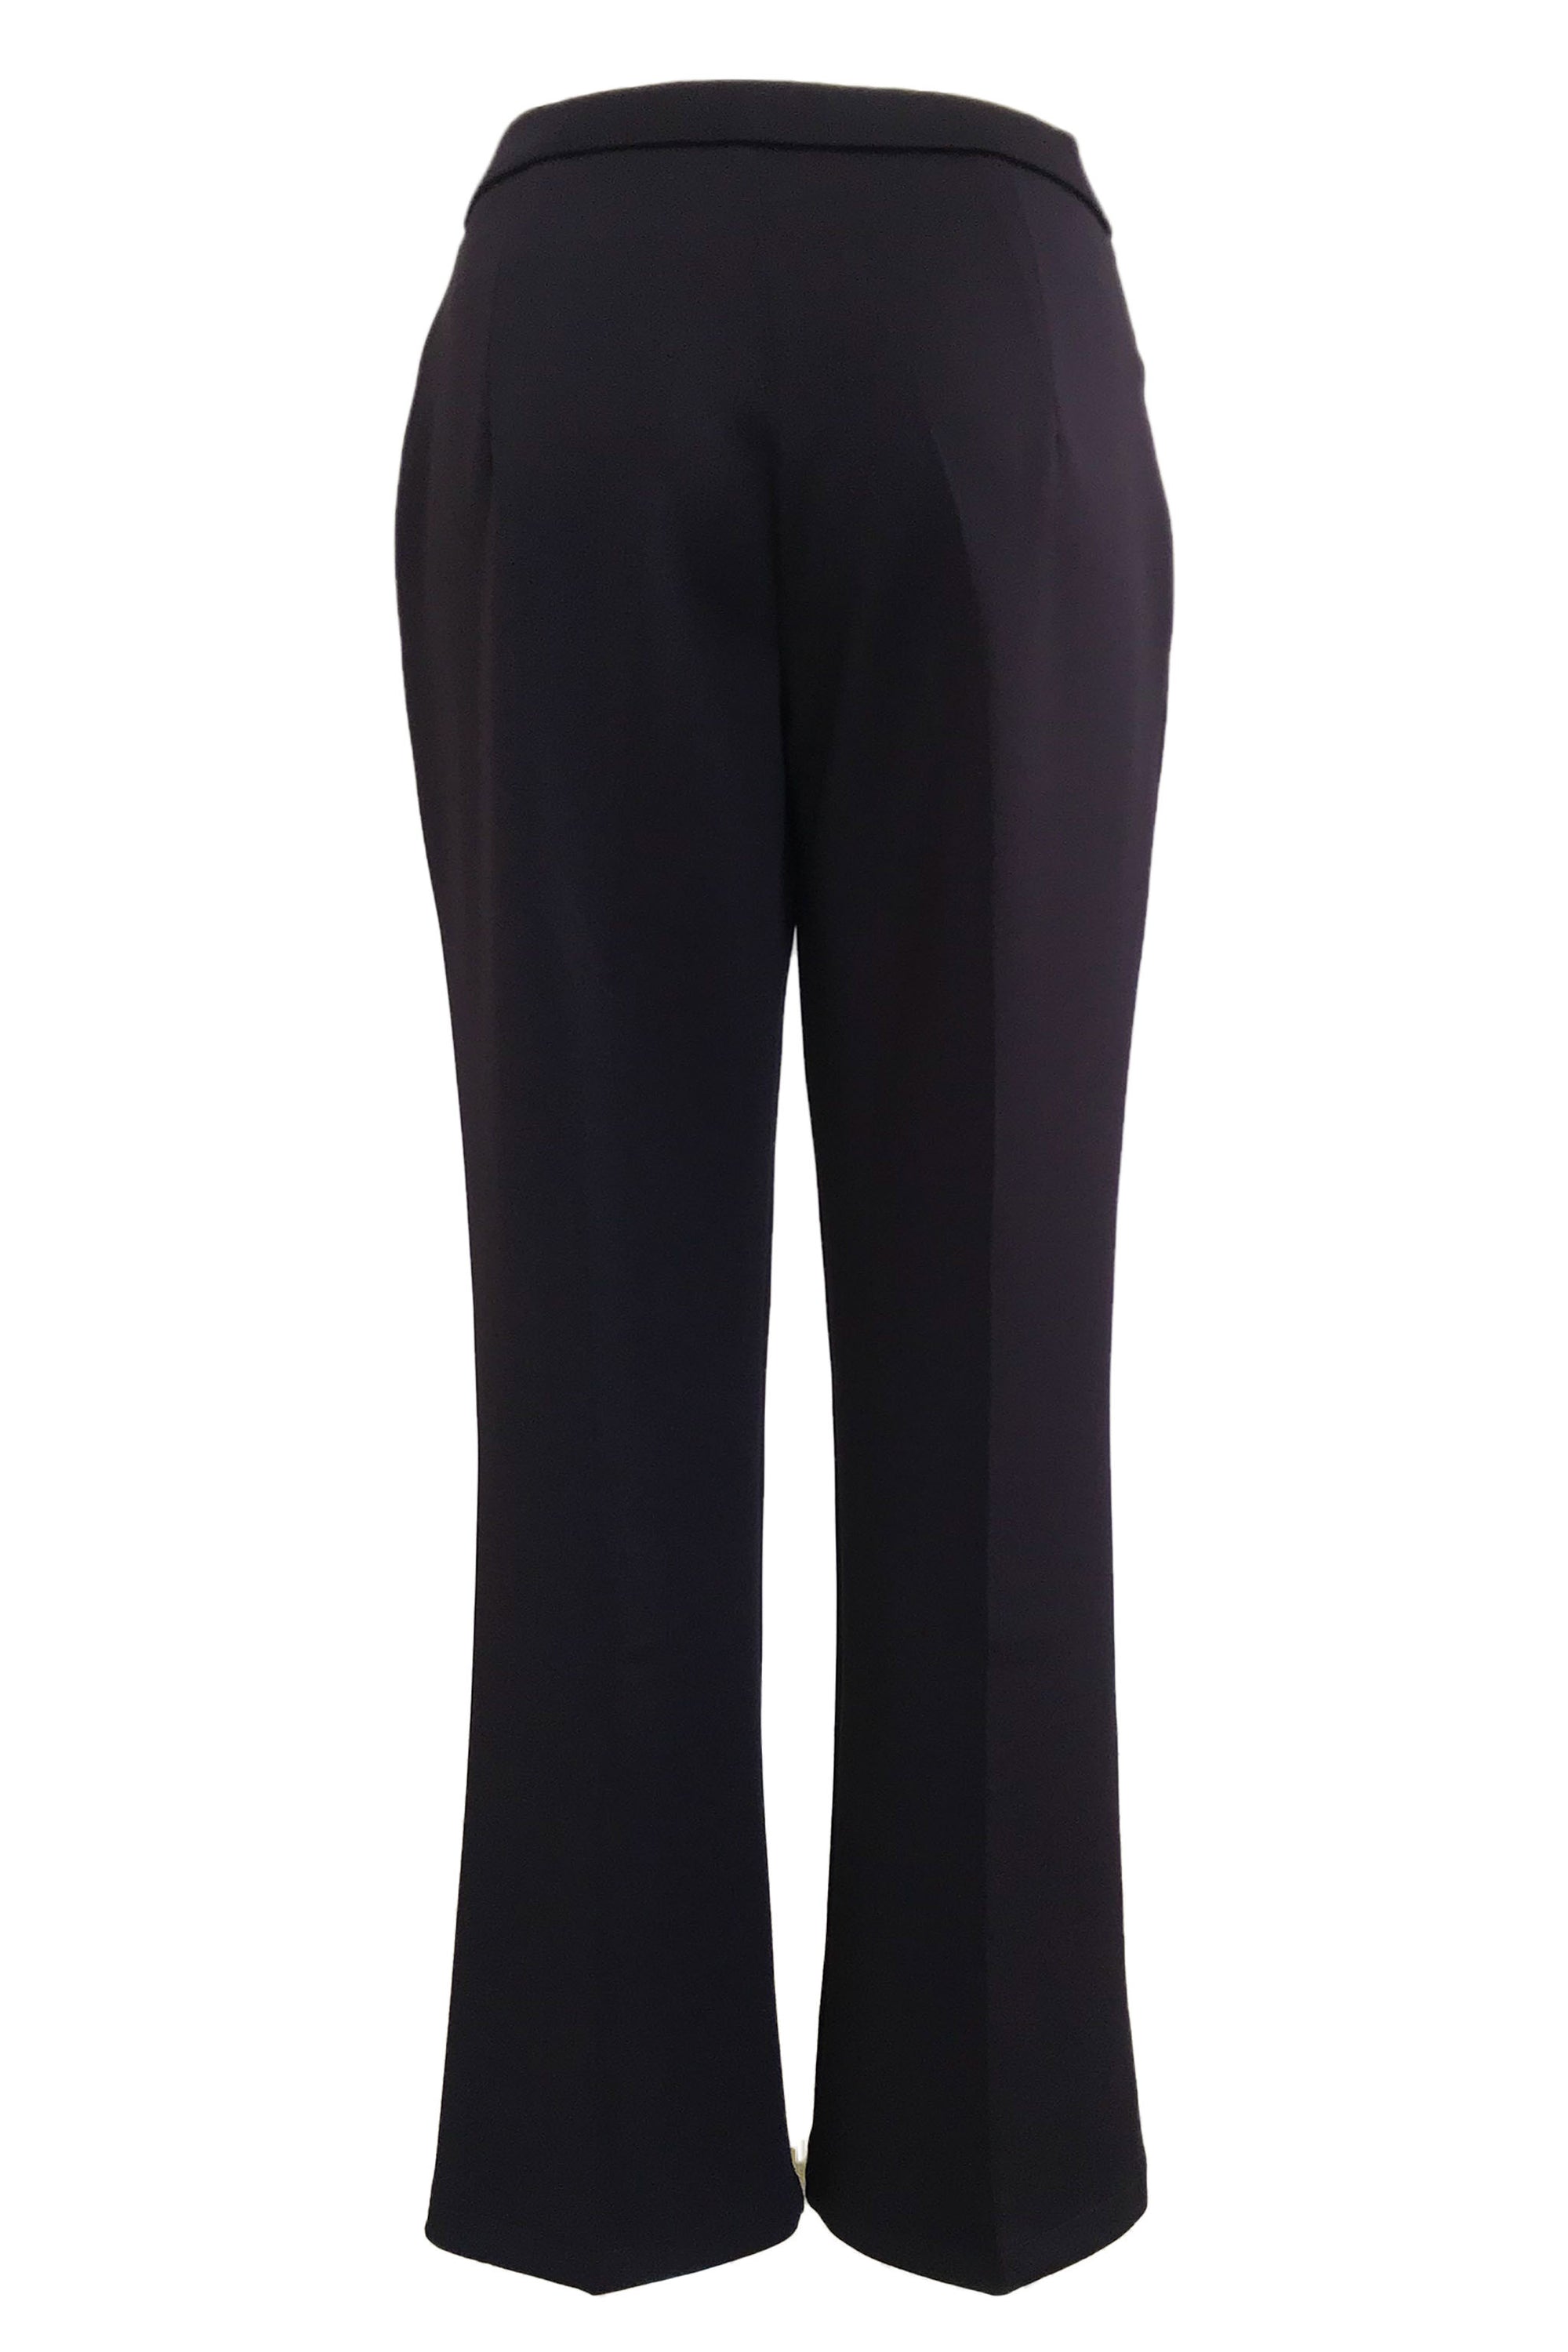 Stretchable Boot Cut Office Pants - Purple